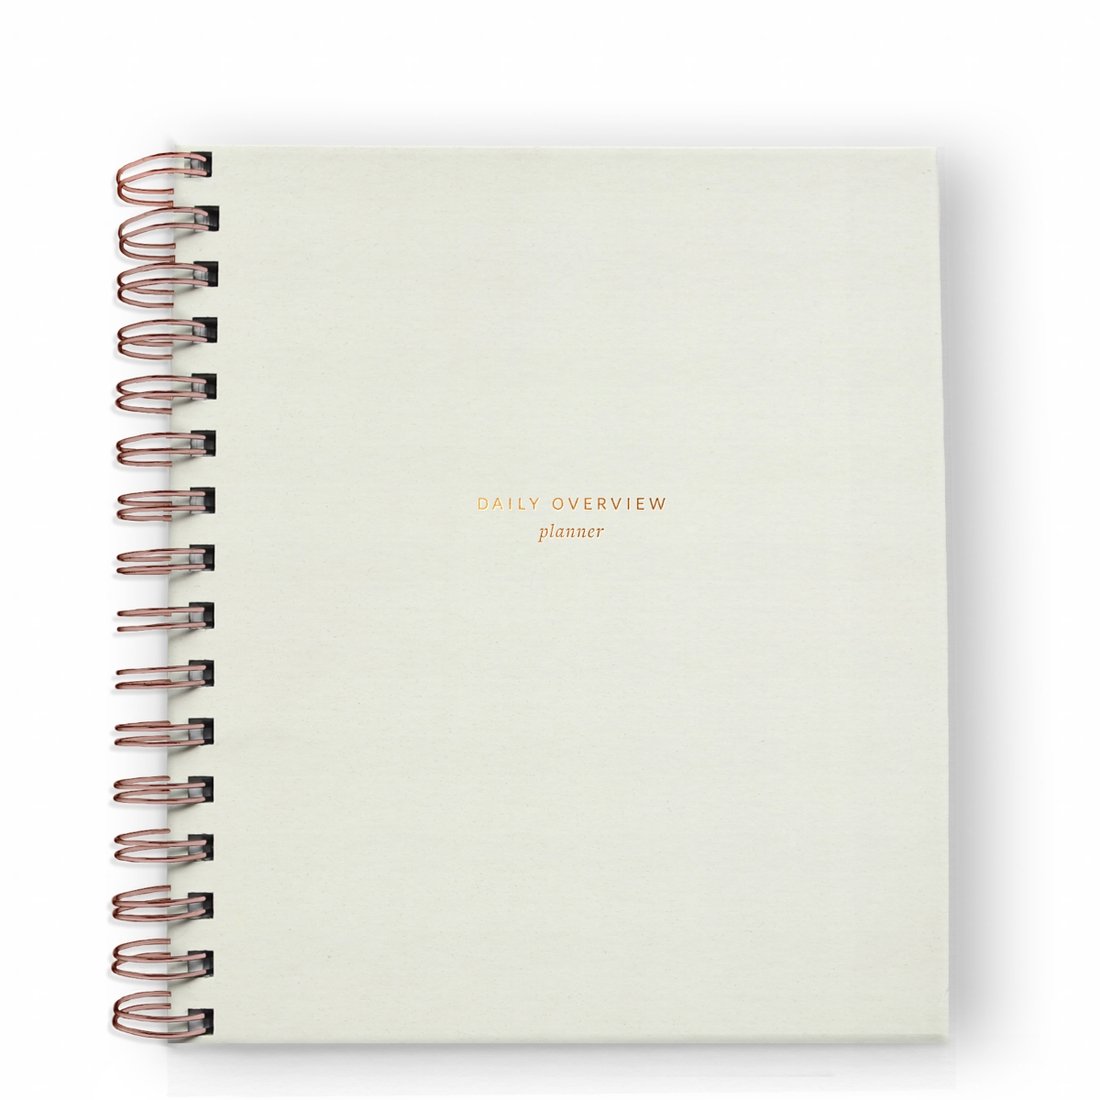 Daily Overview Planner Undated - Chalk White